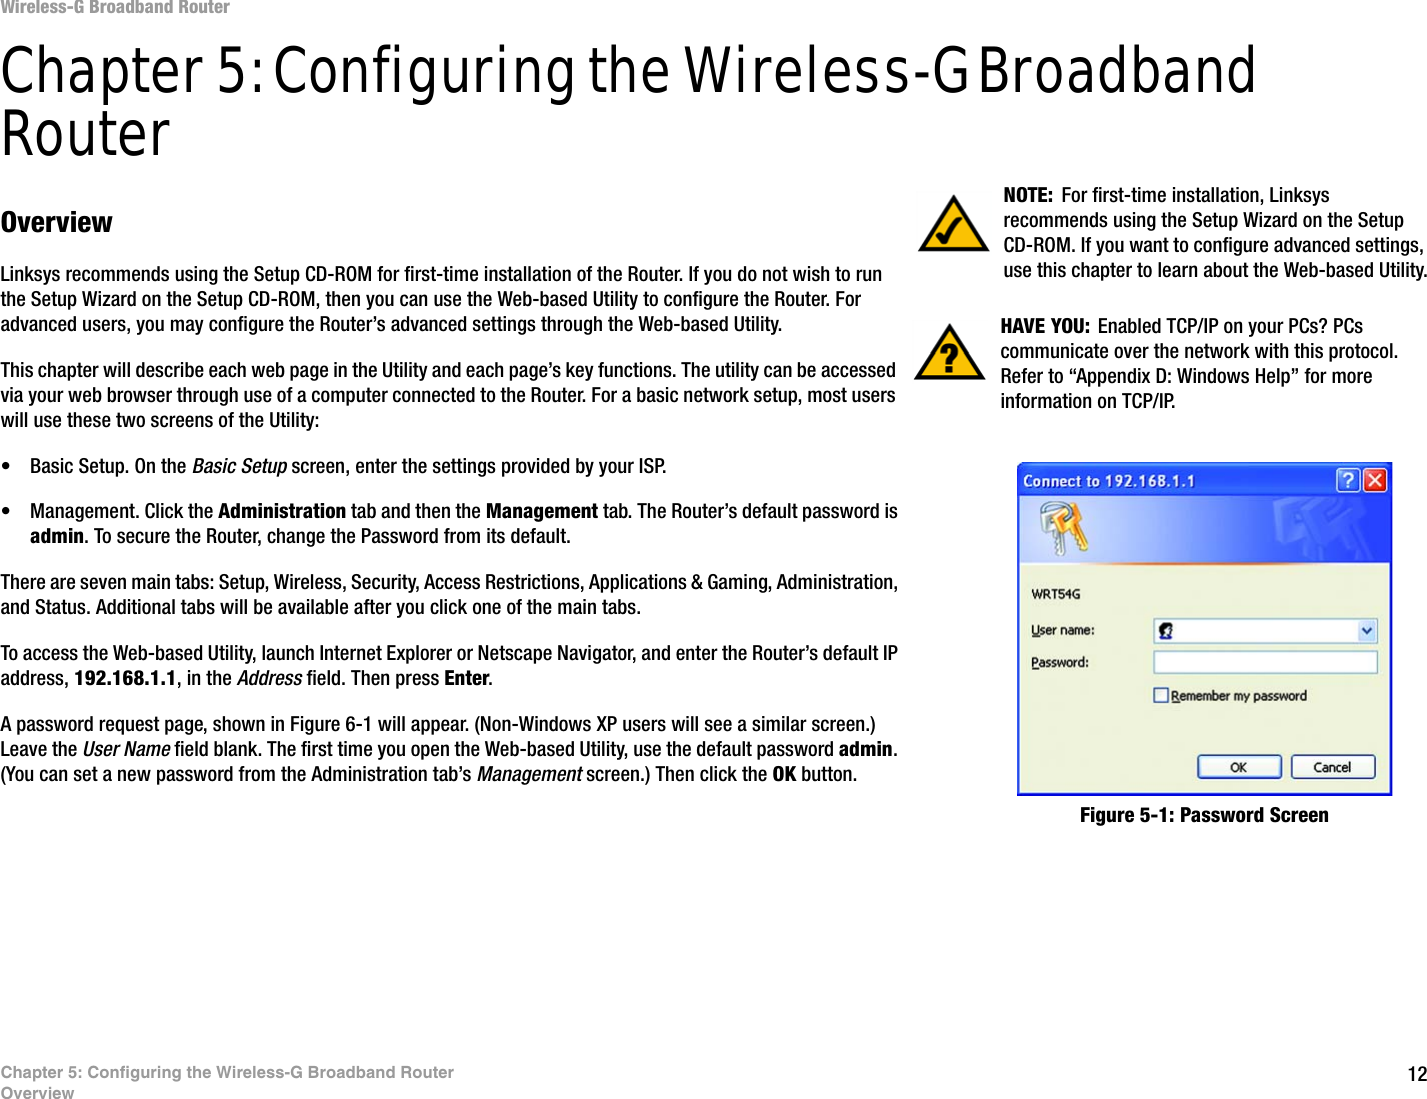 12Chapter 5: Configuring the Wireless-G Broadband RouterOverviewWireless-G Broadband RouterChapter 5: Configuring the Wireless-G Broadband RouterOverviewLinksys recommends using the Setup CD-ROM for first-time installation of the Router. If you do not wish to run the Setup Wizard on the Setup CD-ROM, then you can use the Web-based Utility to configure the Router. For advanced users, you may configure the Router’s advanced settings through the Web-based Utility.This chapter will describe each web page in the Utility and each page’s key functions. The utility can be accessed via your web browser through use of a computer connected to the Router. For a basic network setup, most users will use these two screens of the Utility:• Basic Setup. On the Basic Setup screen, enter the settings provided by your ISP.• Management. Click the Administration tab and then the Management tab. The Router’s default password is admin. To secure the Router, change the Password from its default.There are seven main tabs: Setup, Wireless, Security, Access Restrictions, Applications &amp; Gaming, Administration, and Status. Additional tabs will be available after you click one of the main tabs.To access the Web-based Utility, launch Internet Explorer or Netscape Navigator, and enter the Router’s default IP address, 192.168.1.1, in the Address field. Then press Enter. A password request page, shown in Figure 6-1 will appear. (Non-Windows XP users will see a similar screen.) Leave the User Name field blank. The first time you open the Web-based Utility, use the default password admin. (You can set a new password from the Administration tab’s Management screen.) Then click the OK button. HAVE YOU:  Enabled TCP/IP on your PCs? PCs communicate over the network with this protocol. Refer to “Appendix D: Windows Help” for more information on TCP/IP.NOTE: For first-time installation, Linksys recommends using the Setup Wizard on the Setup CD-ROM. If you want to configure advanced settings, use this chapter to learn about the Web-based Utility.Figure 5-1: Password Screen